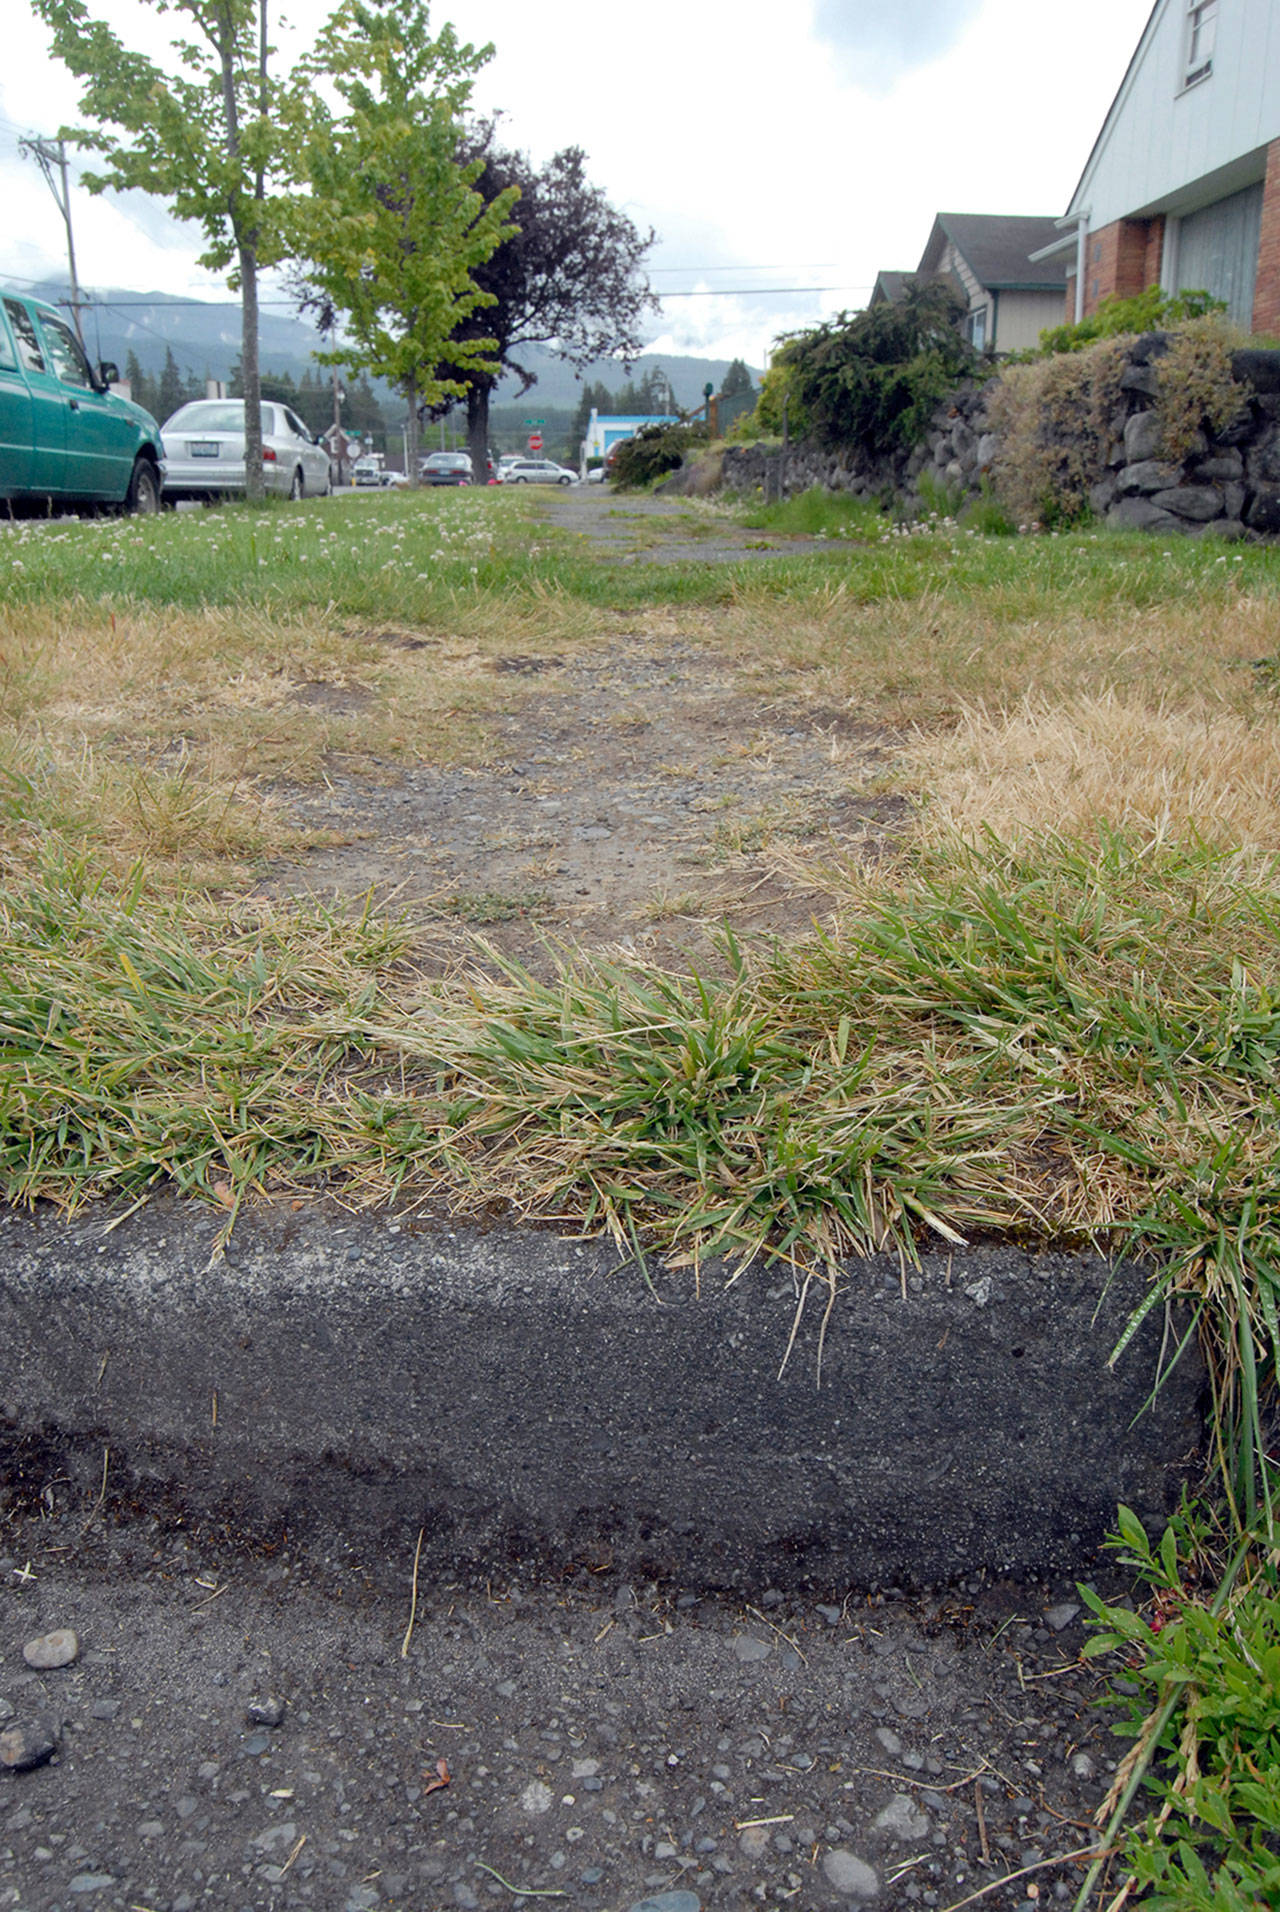 A curb without a wheelchair access cut stands at the corner of Francis and Georgiana streets in Port Angeles. (Keith Thorpe/Peninsula Daily News)